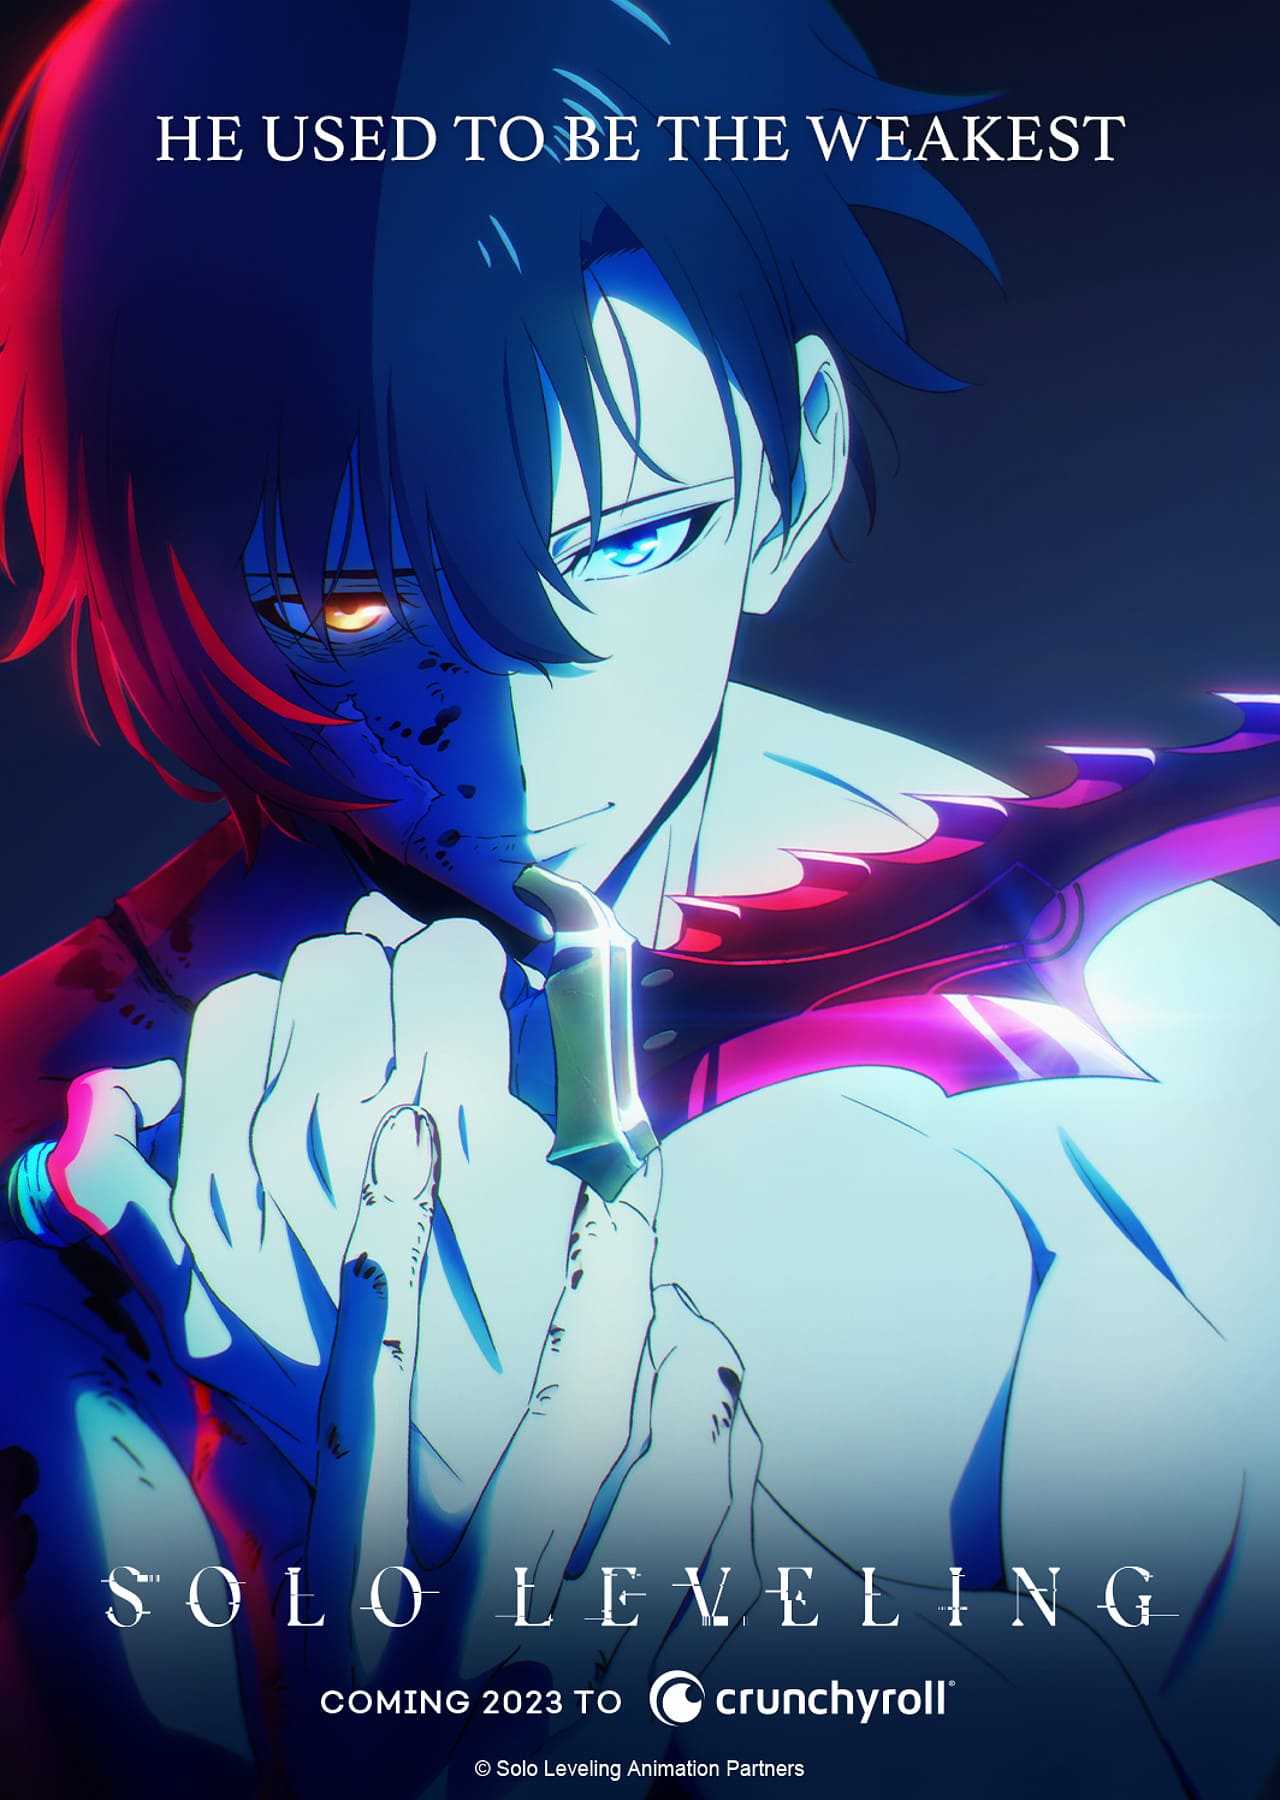 Solo Leveling: Crunchyroll releases first trailer for hype anime